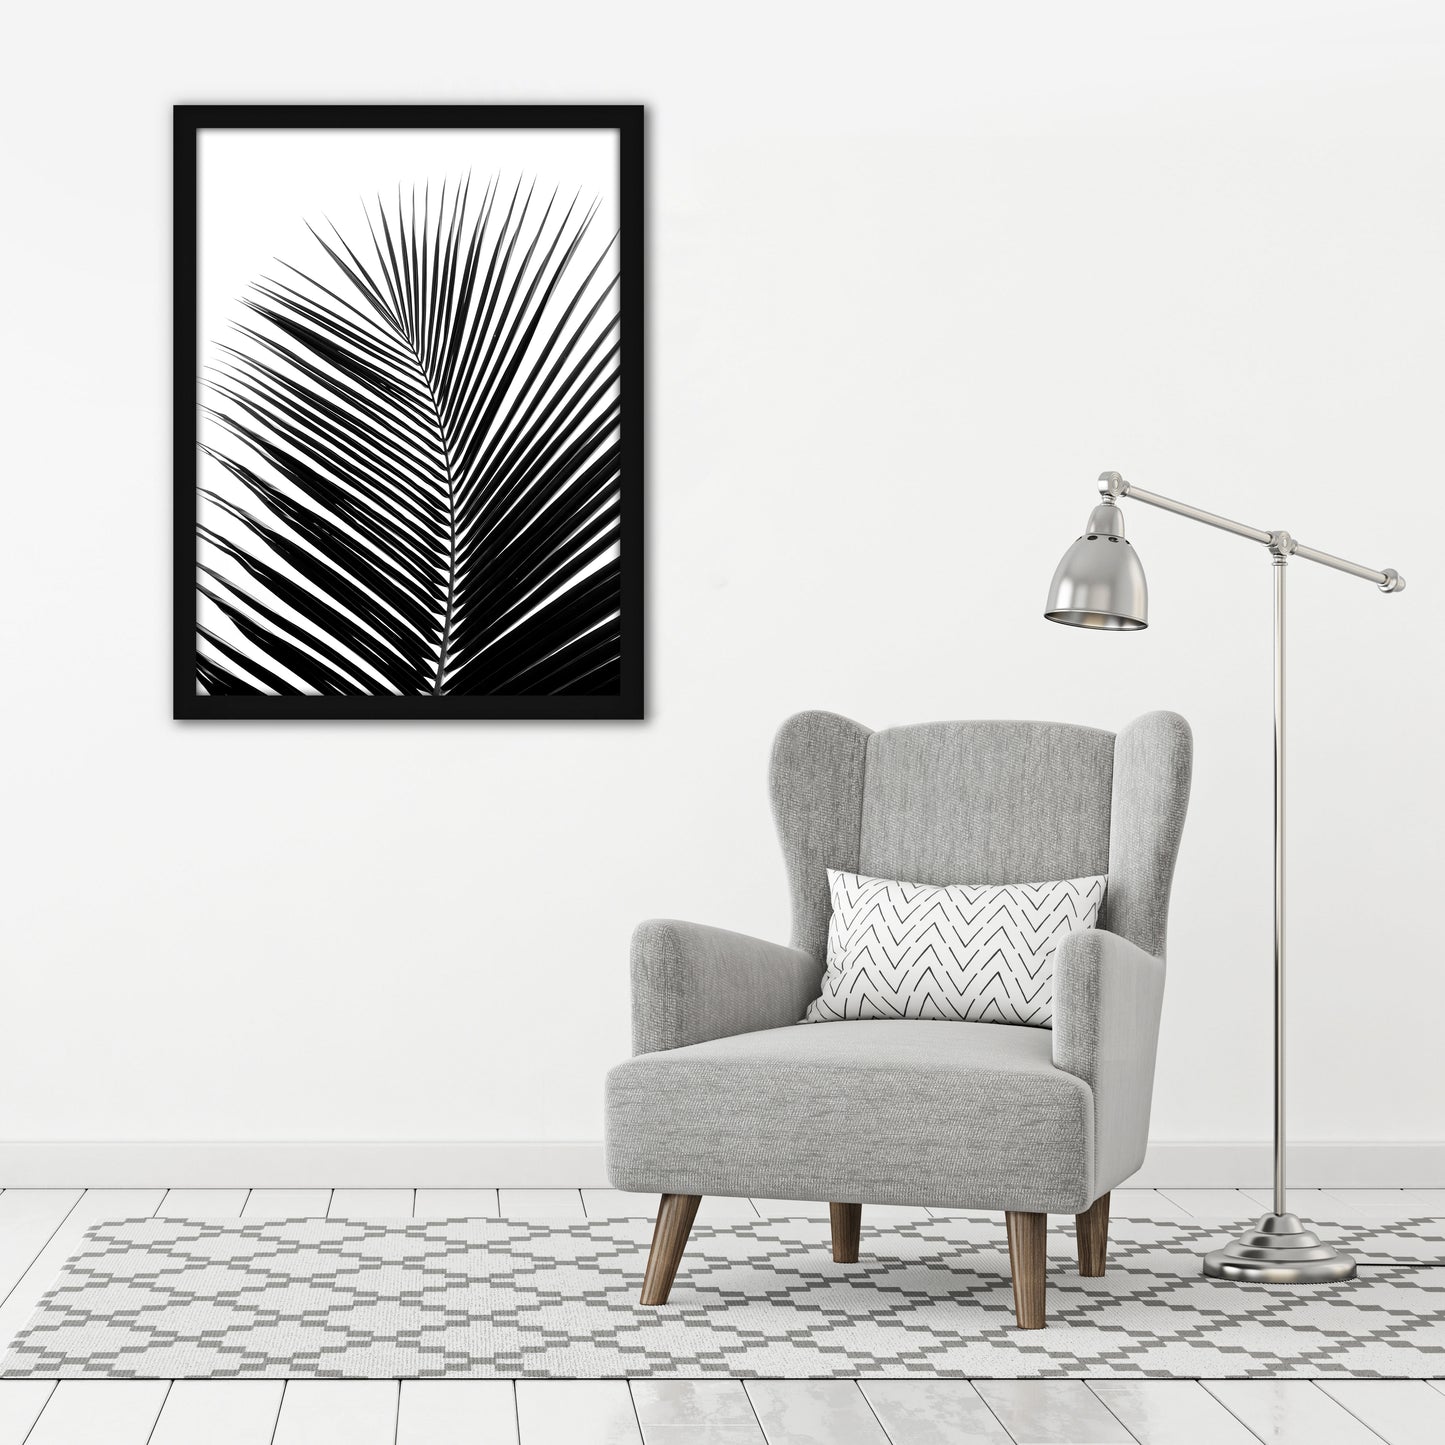 30x40 in Black - Horizontal and Vertical Formats for Wall with Hanging Hardware Included - Poster Frame